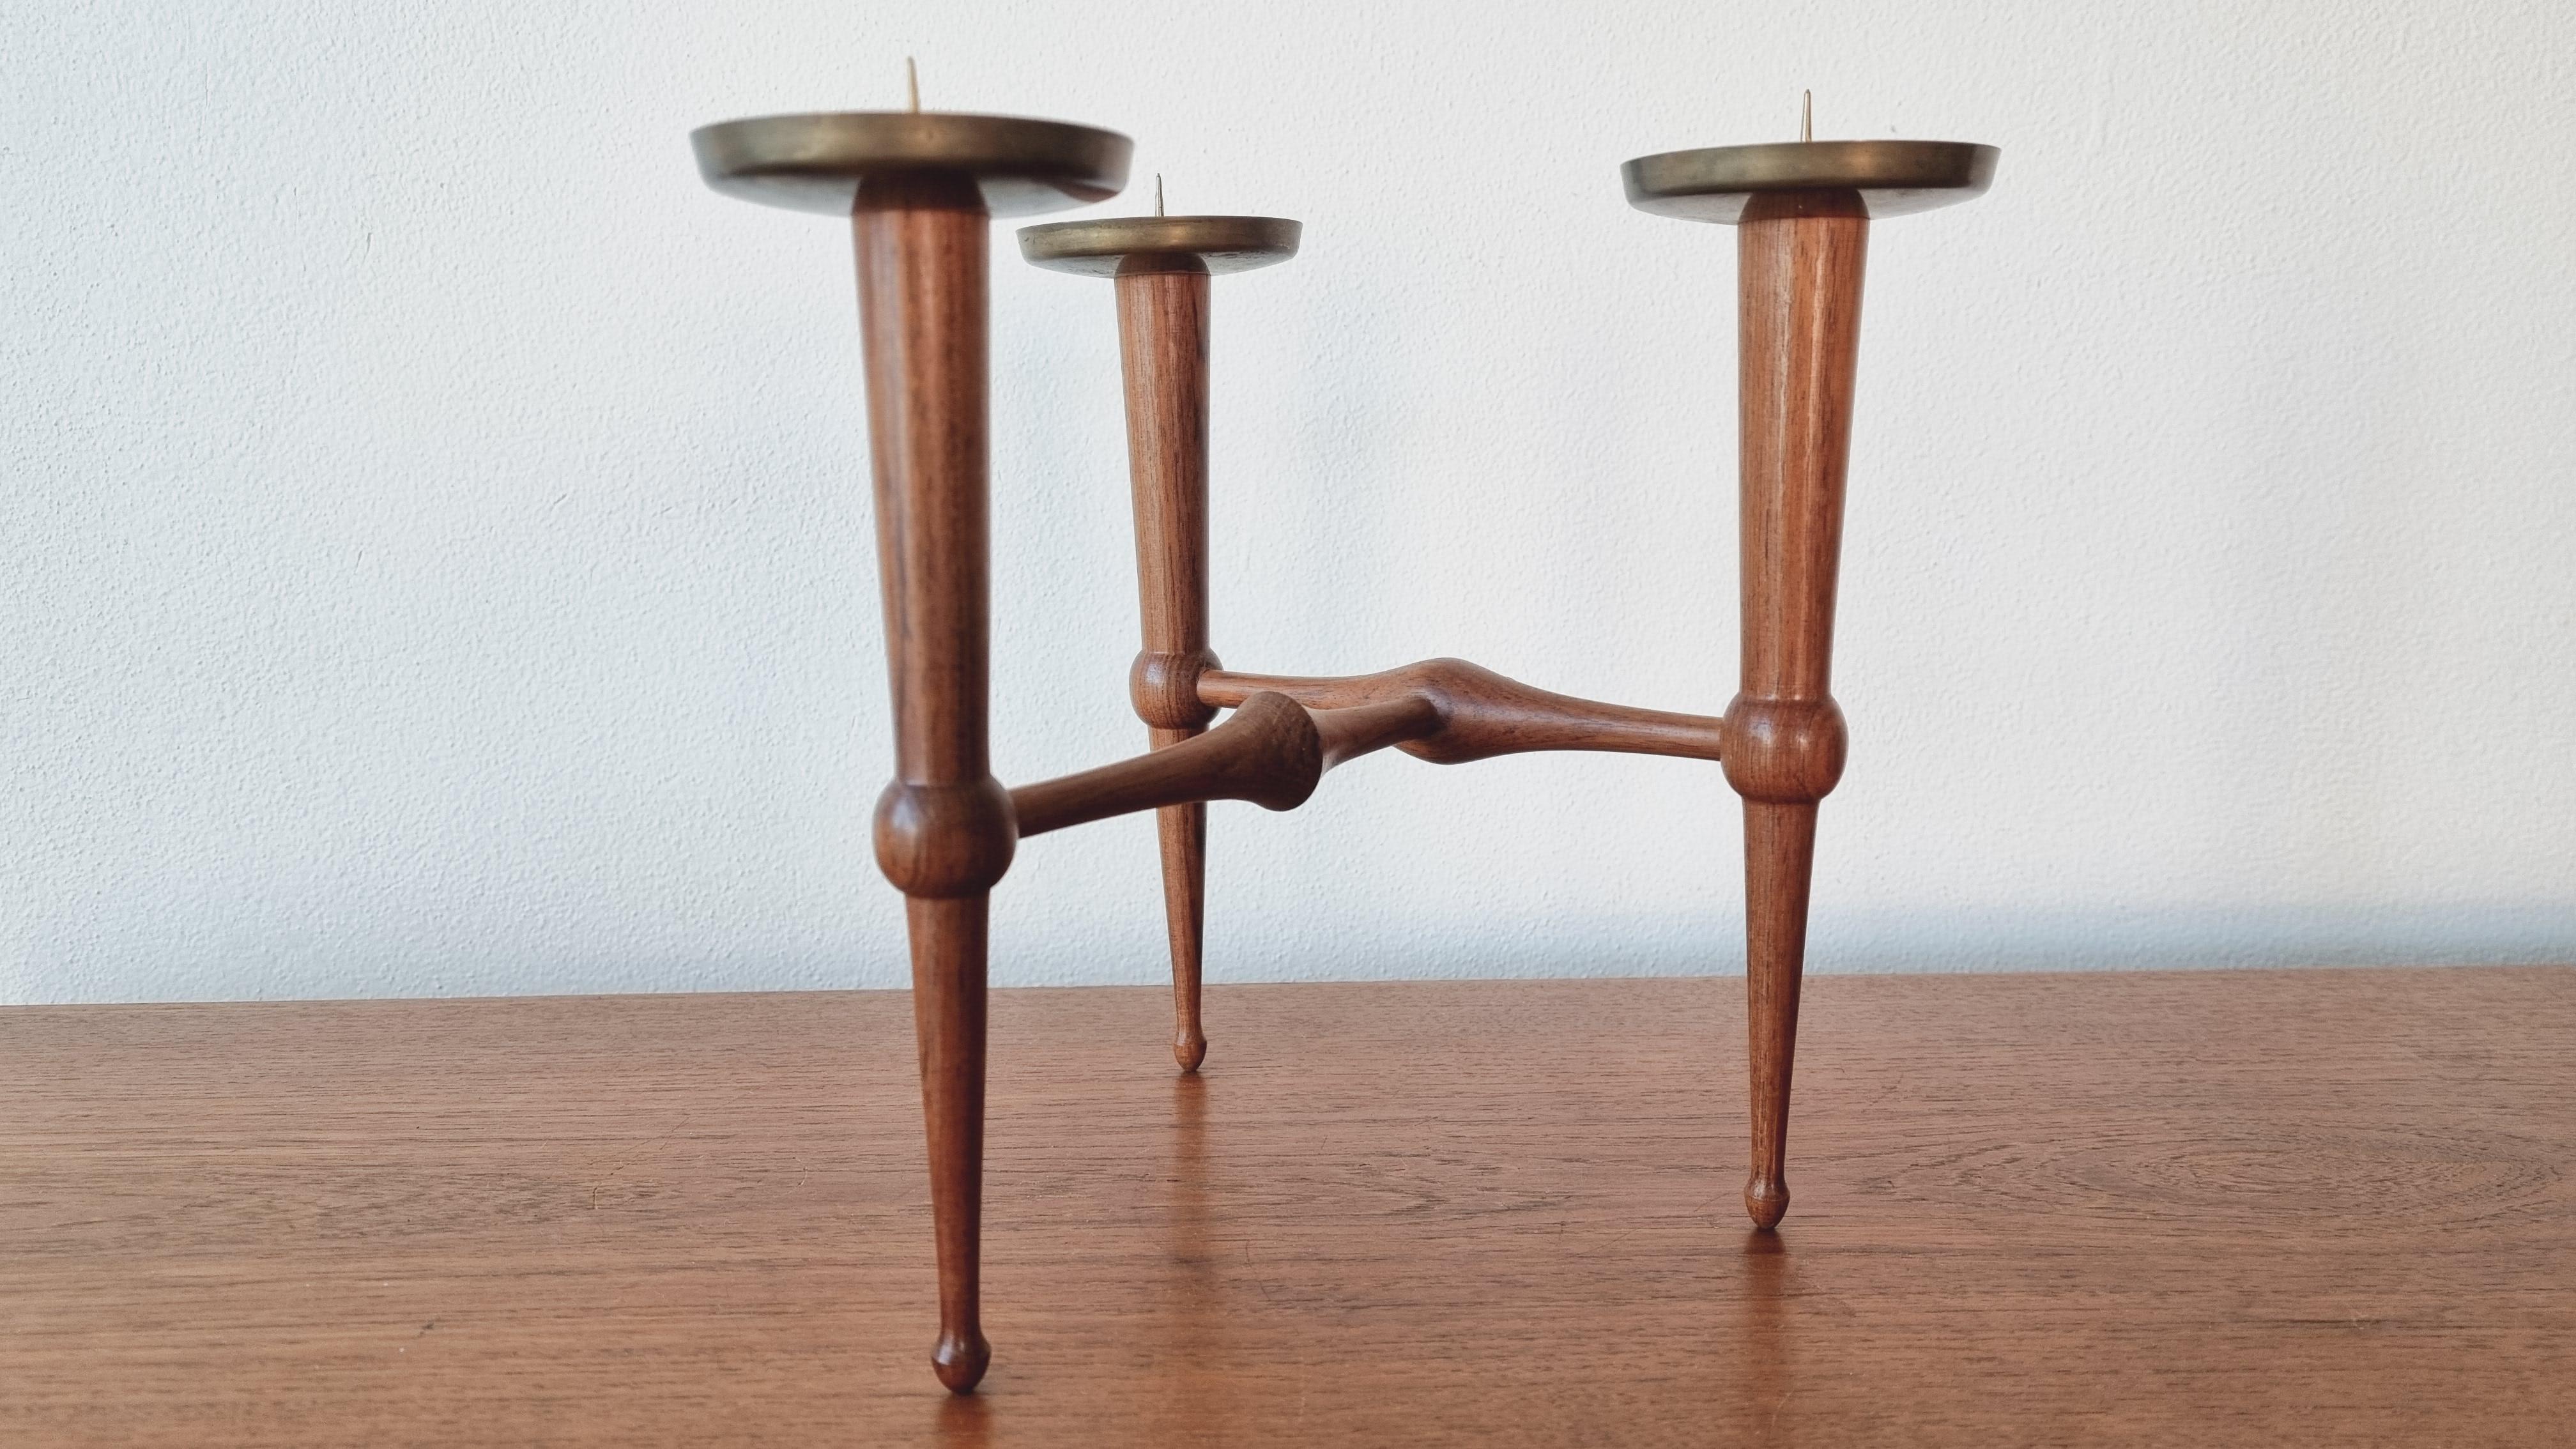 Midcentury Teak and Brass Rare Table Candle Holder / Stick, Denmark, 1960s For Sale 2